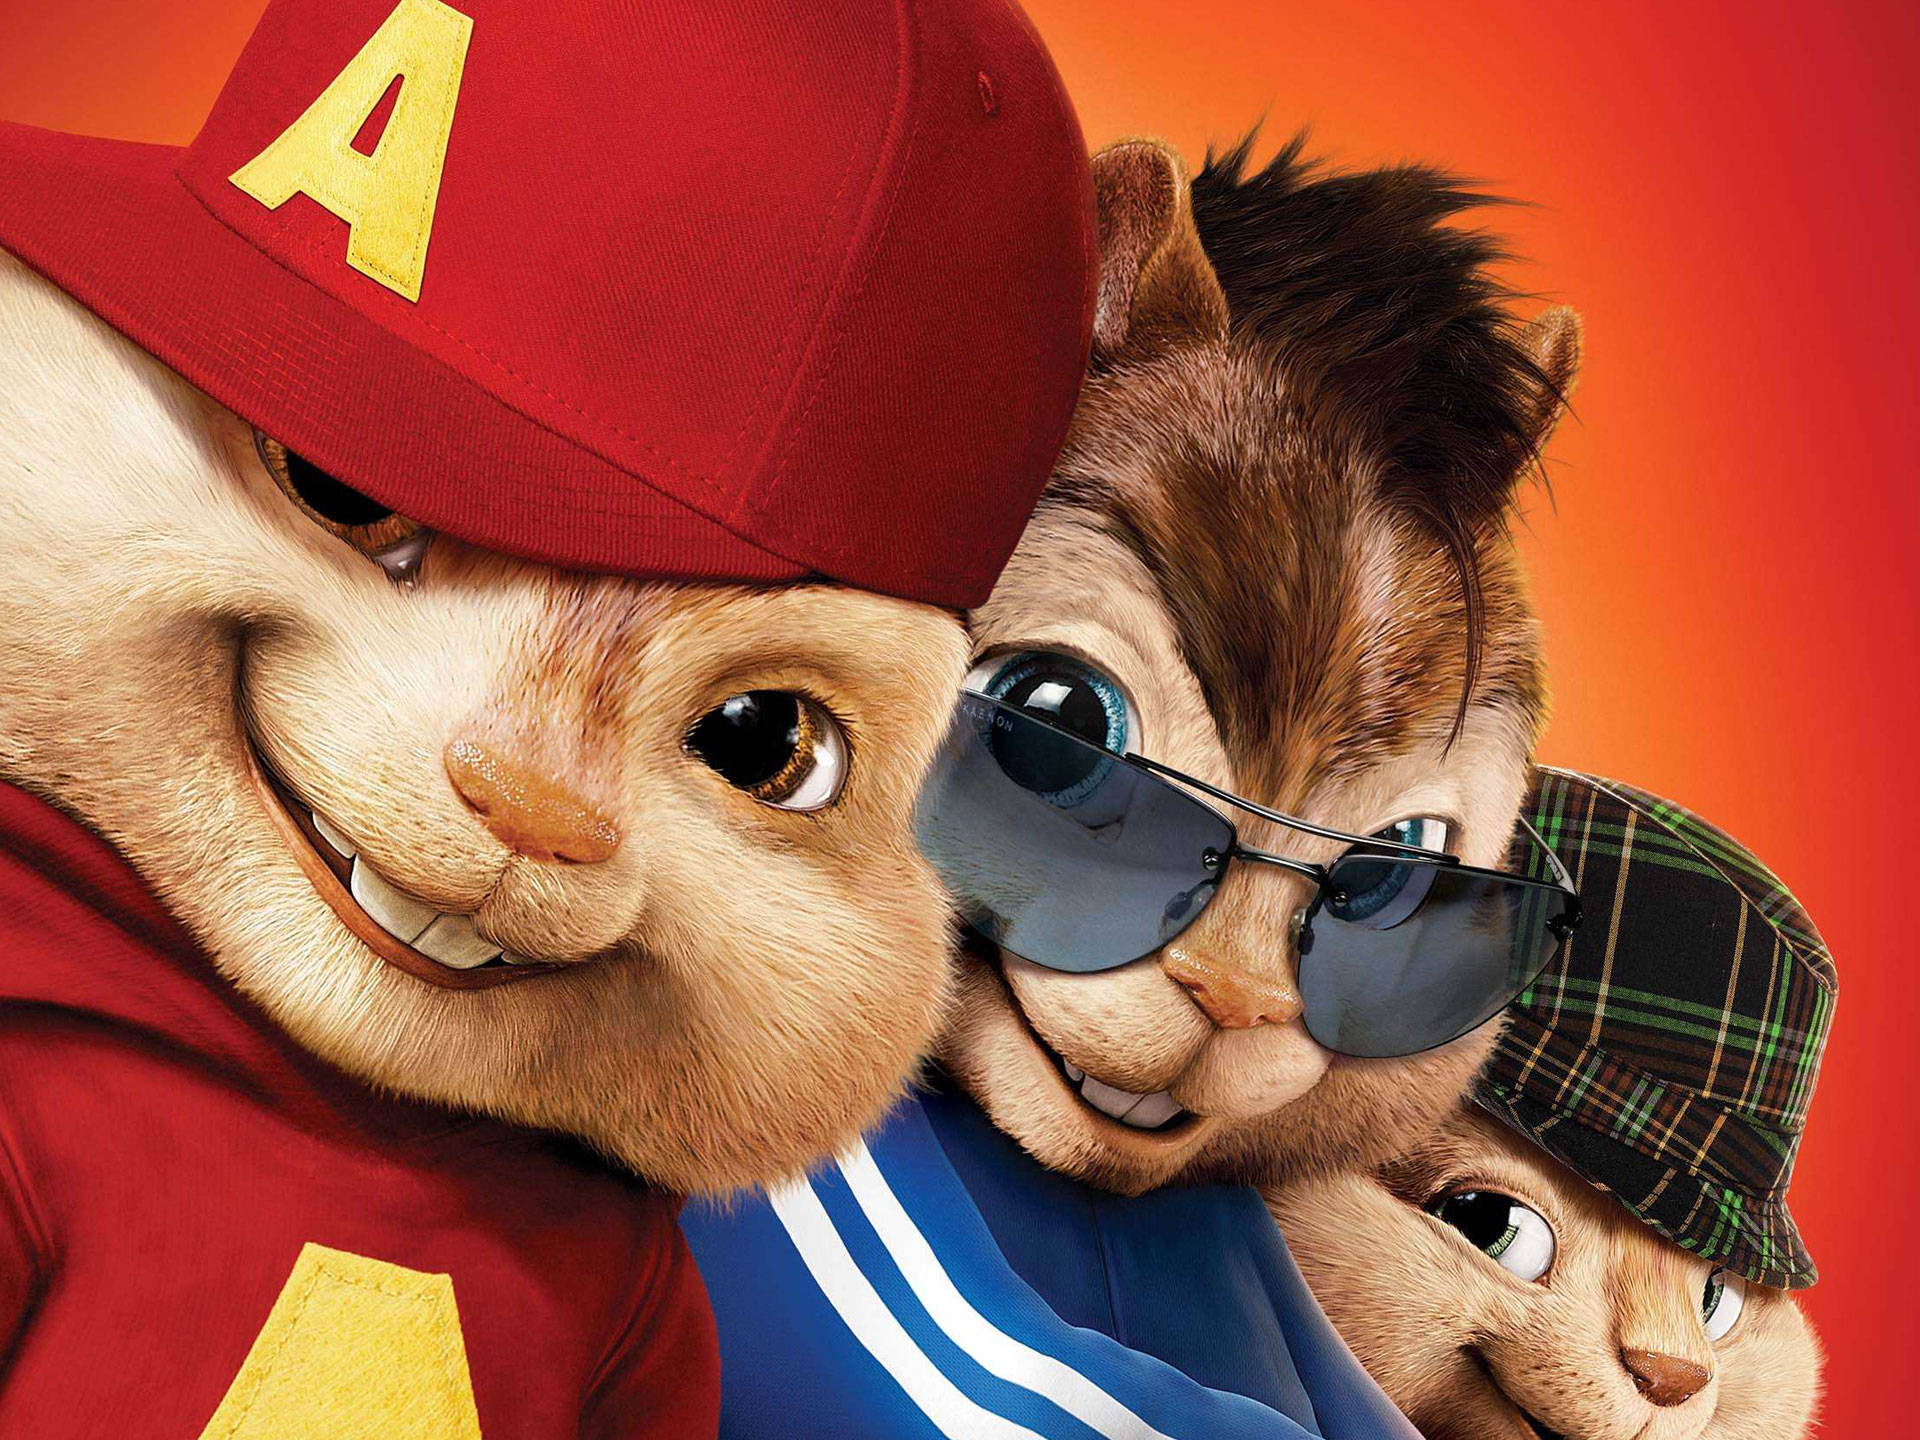 Alvin And The Chipmunks Wallpaper